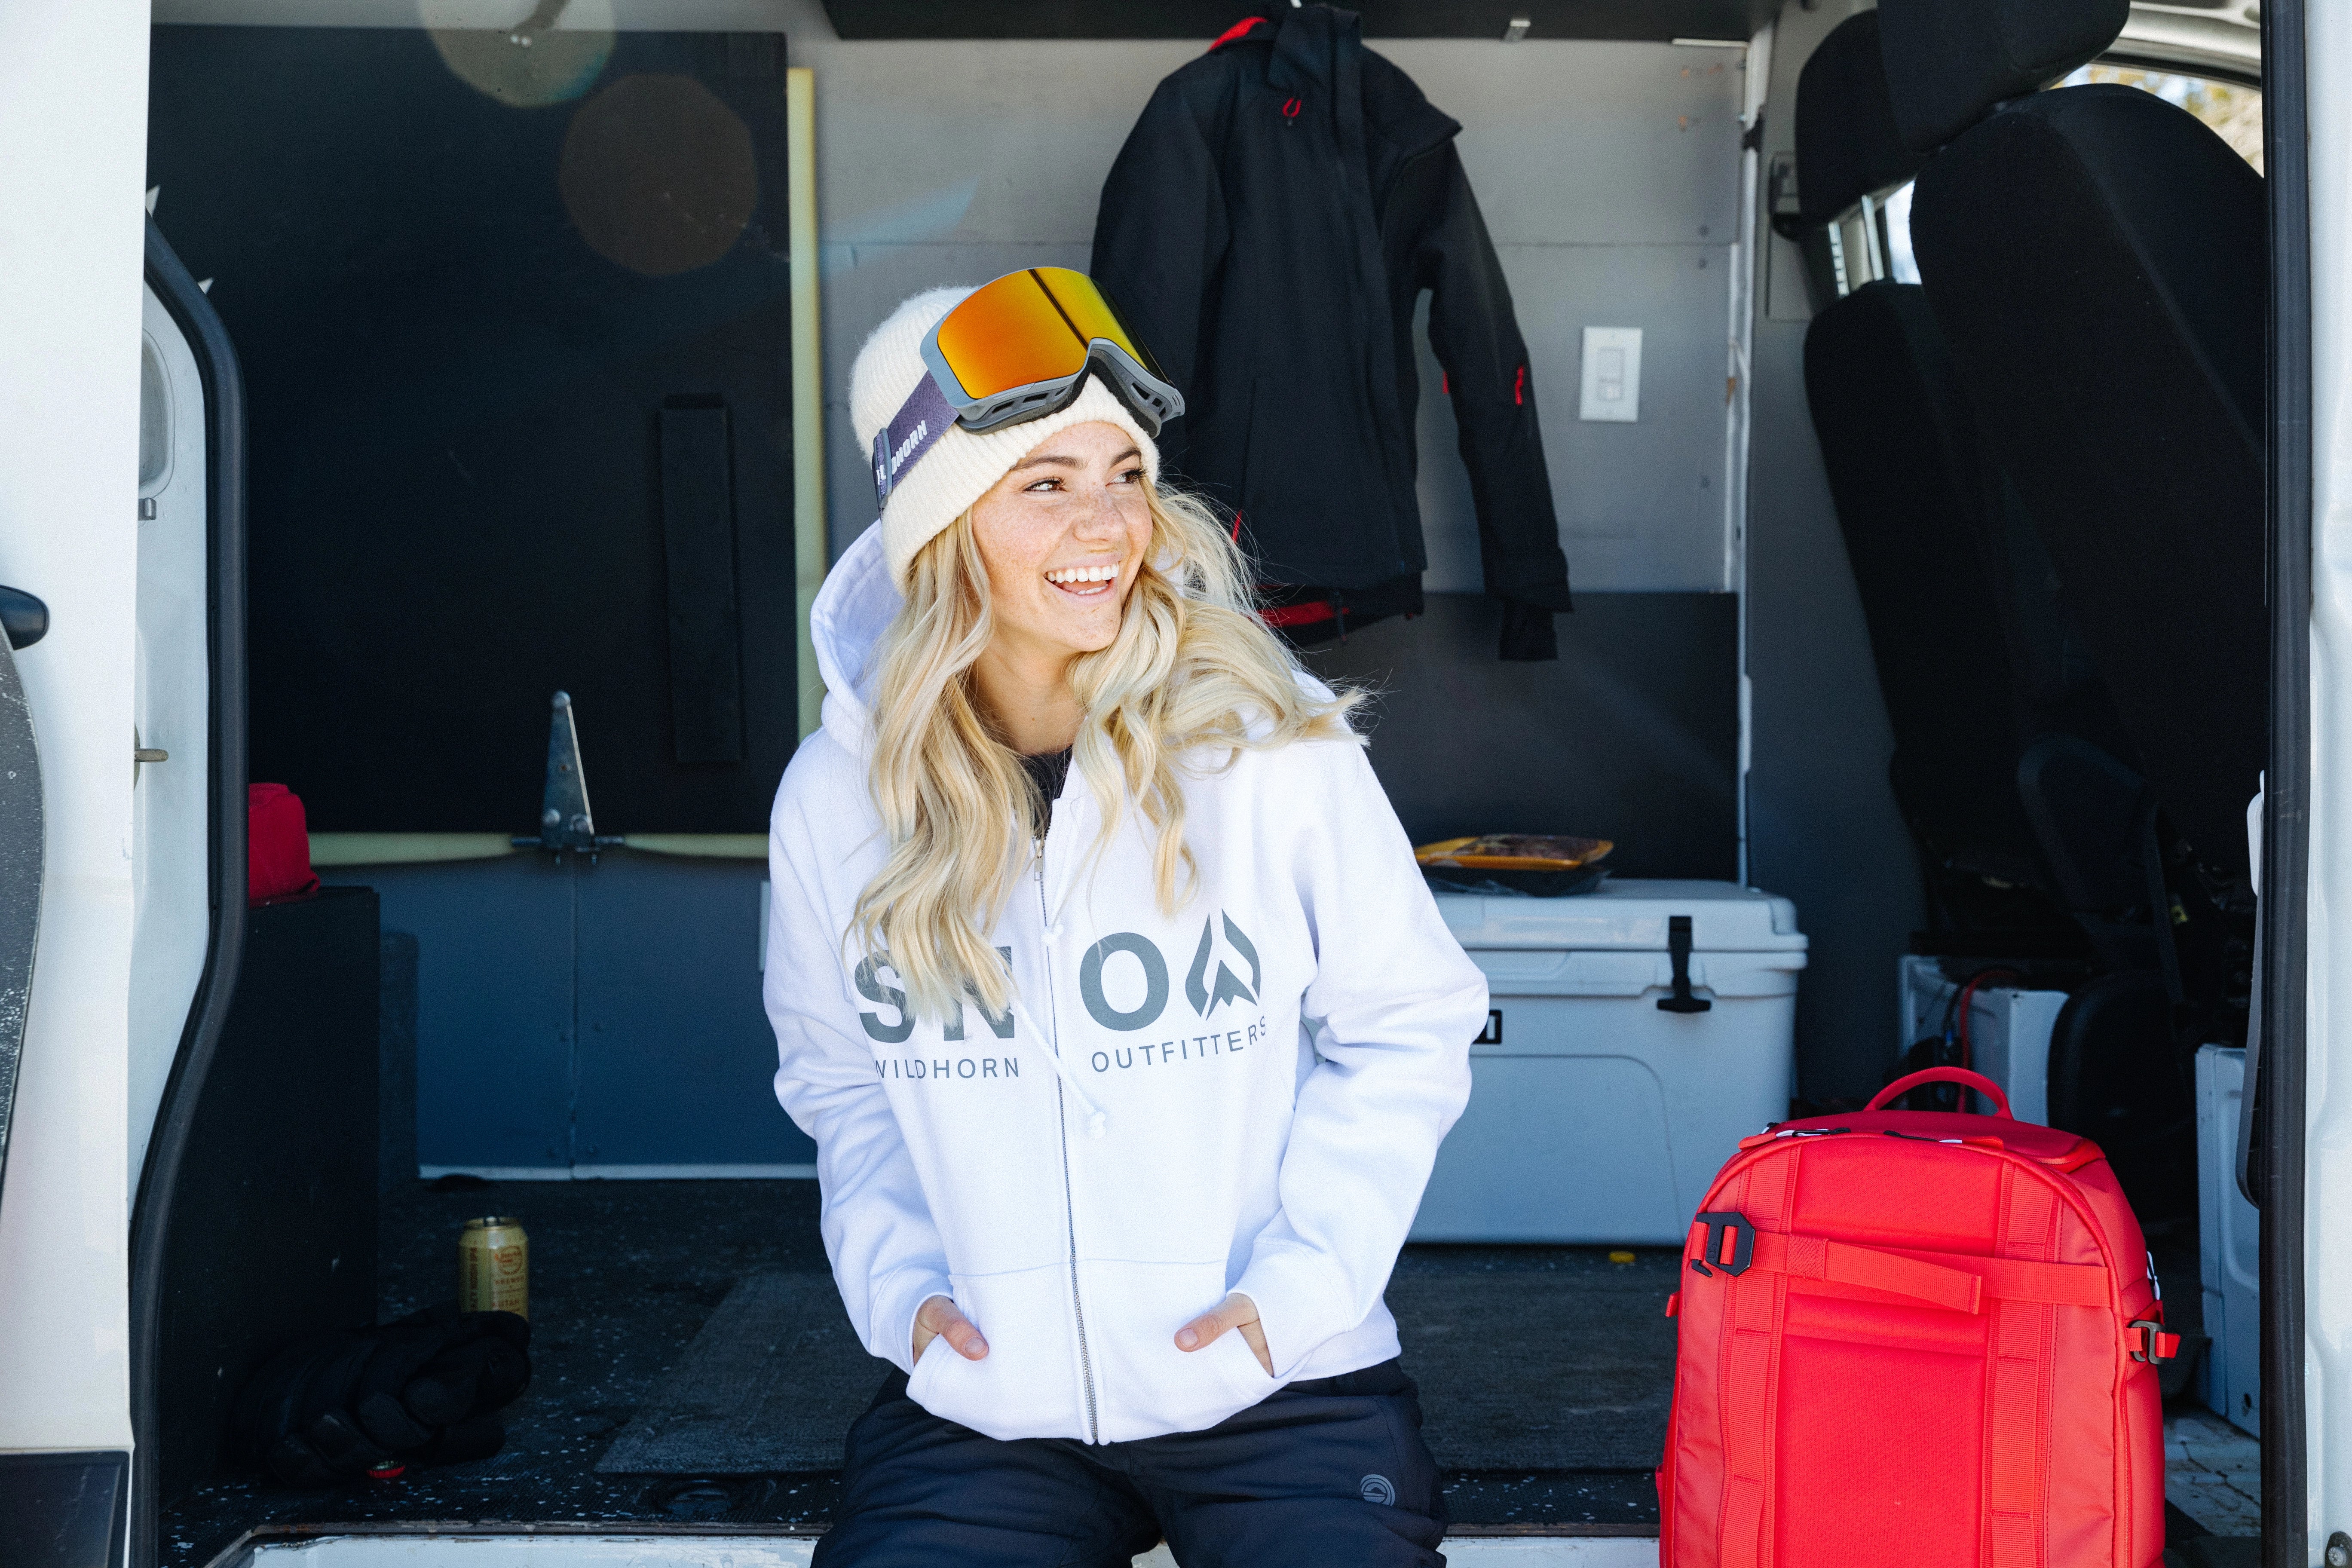 Woman in the back of a van smiling with ski goggles on her head